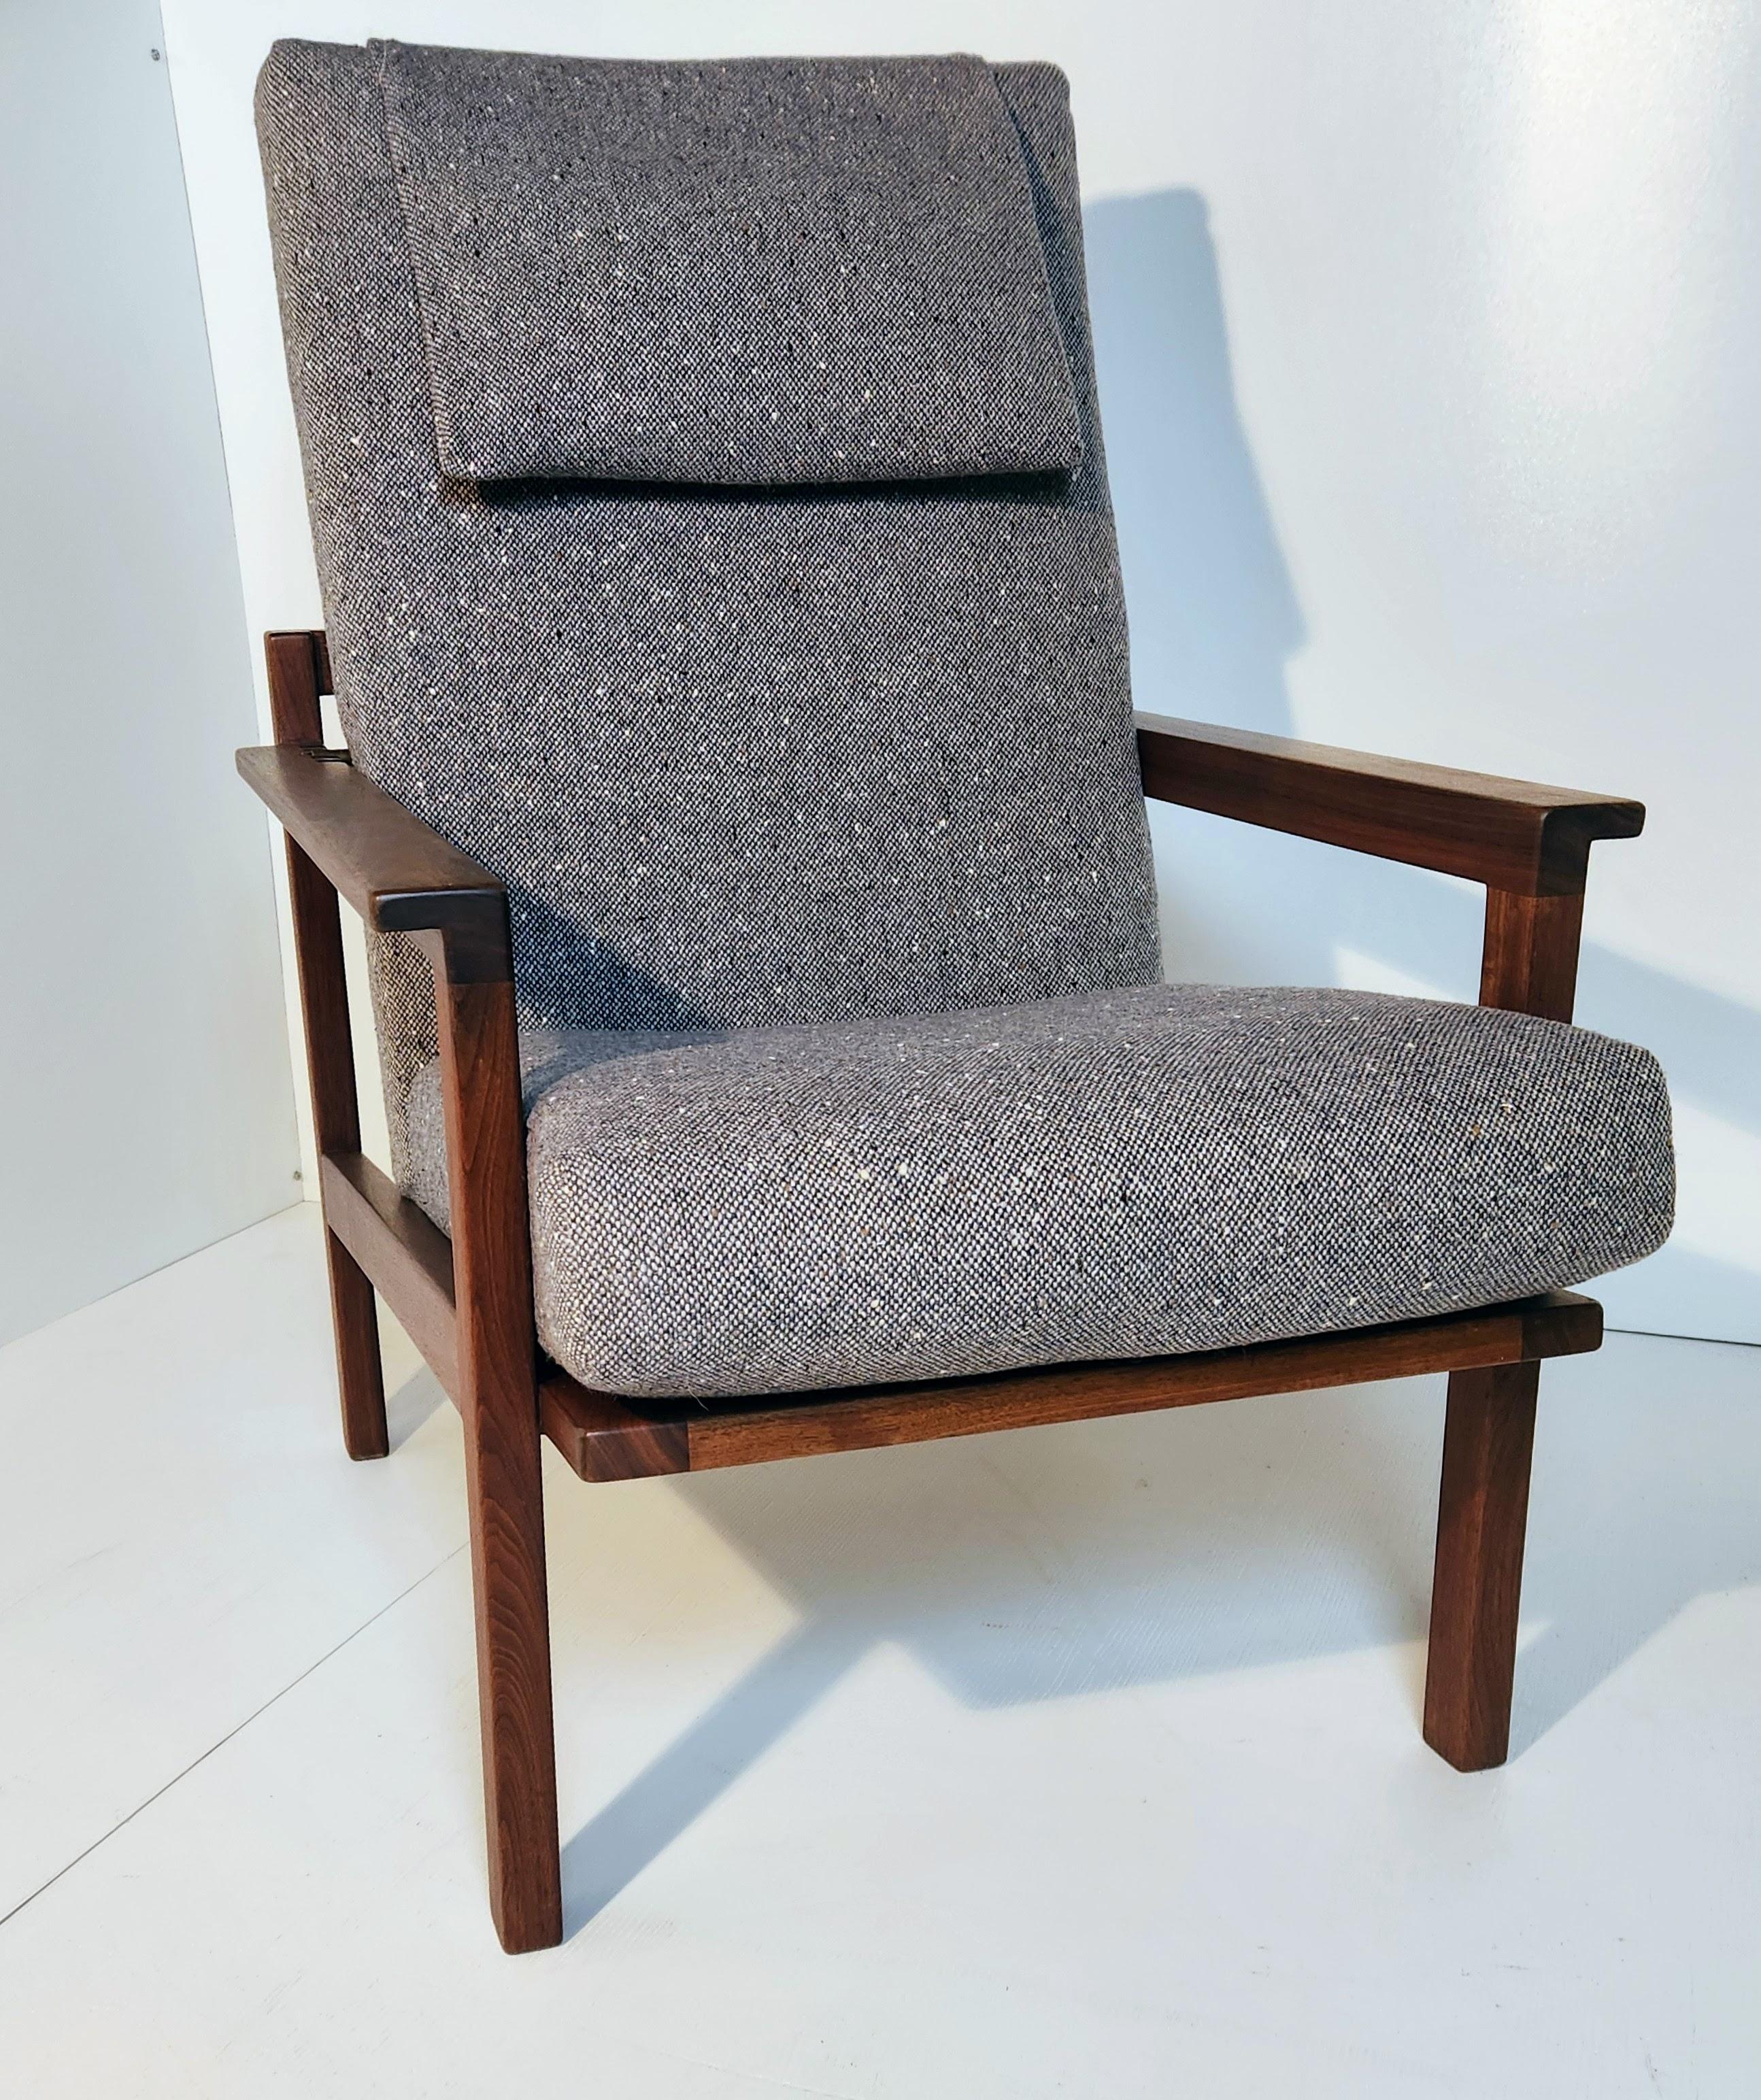 American Walnut Adjustable Lounge Chair Arden Riddle (1921-2011) pre-1965 For Sale